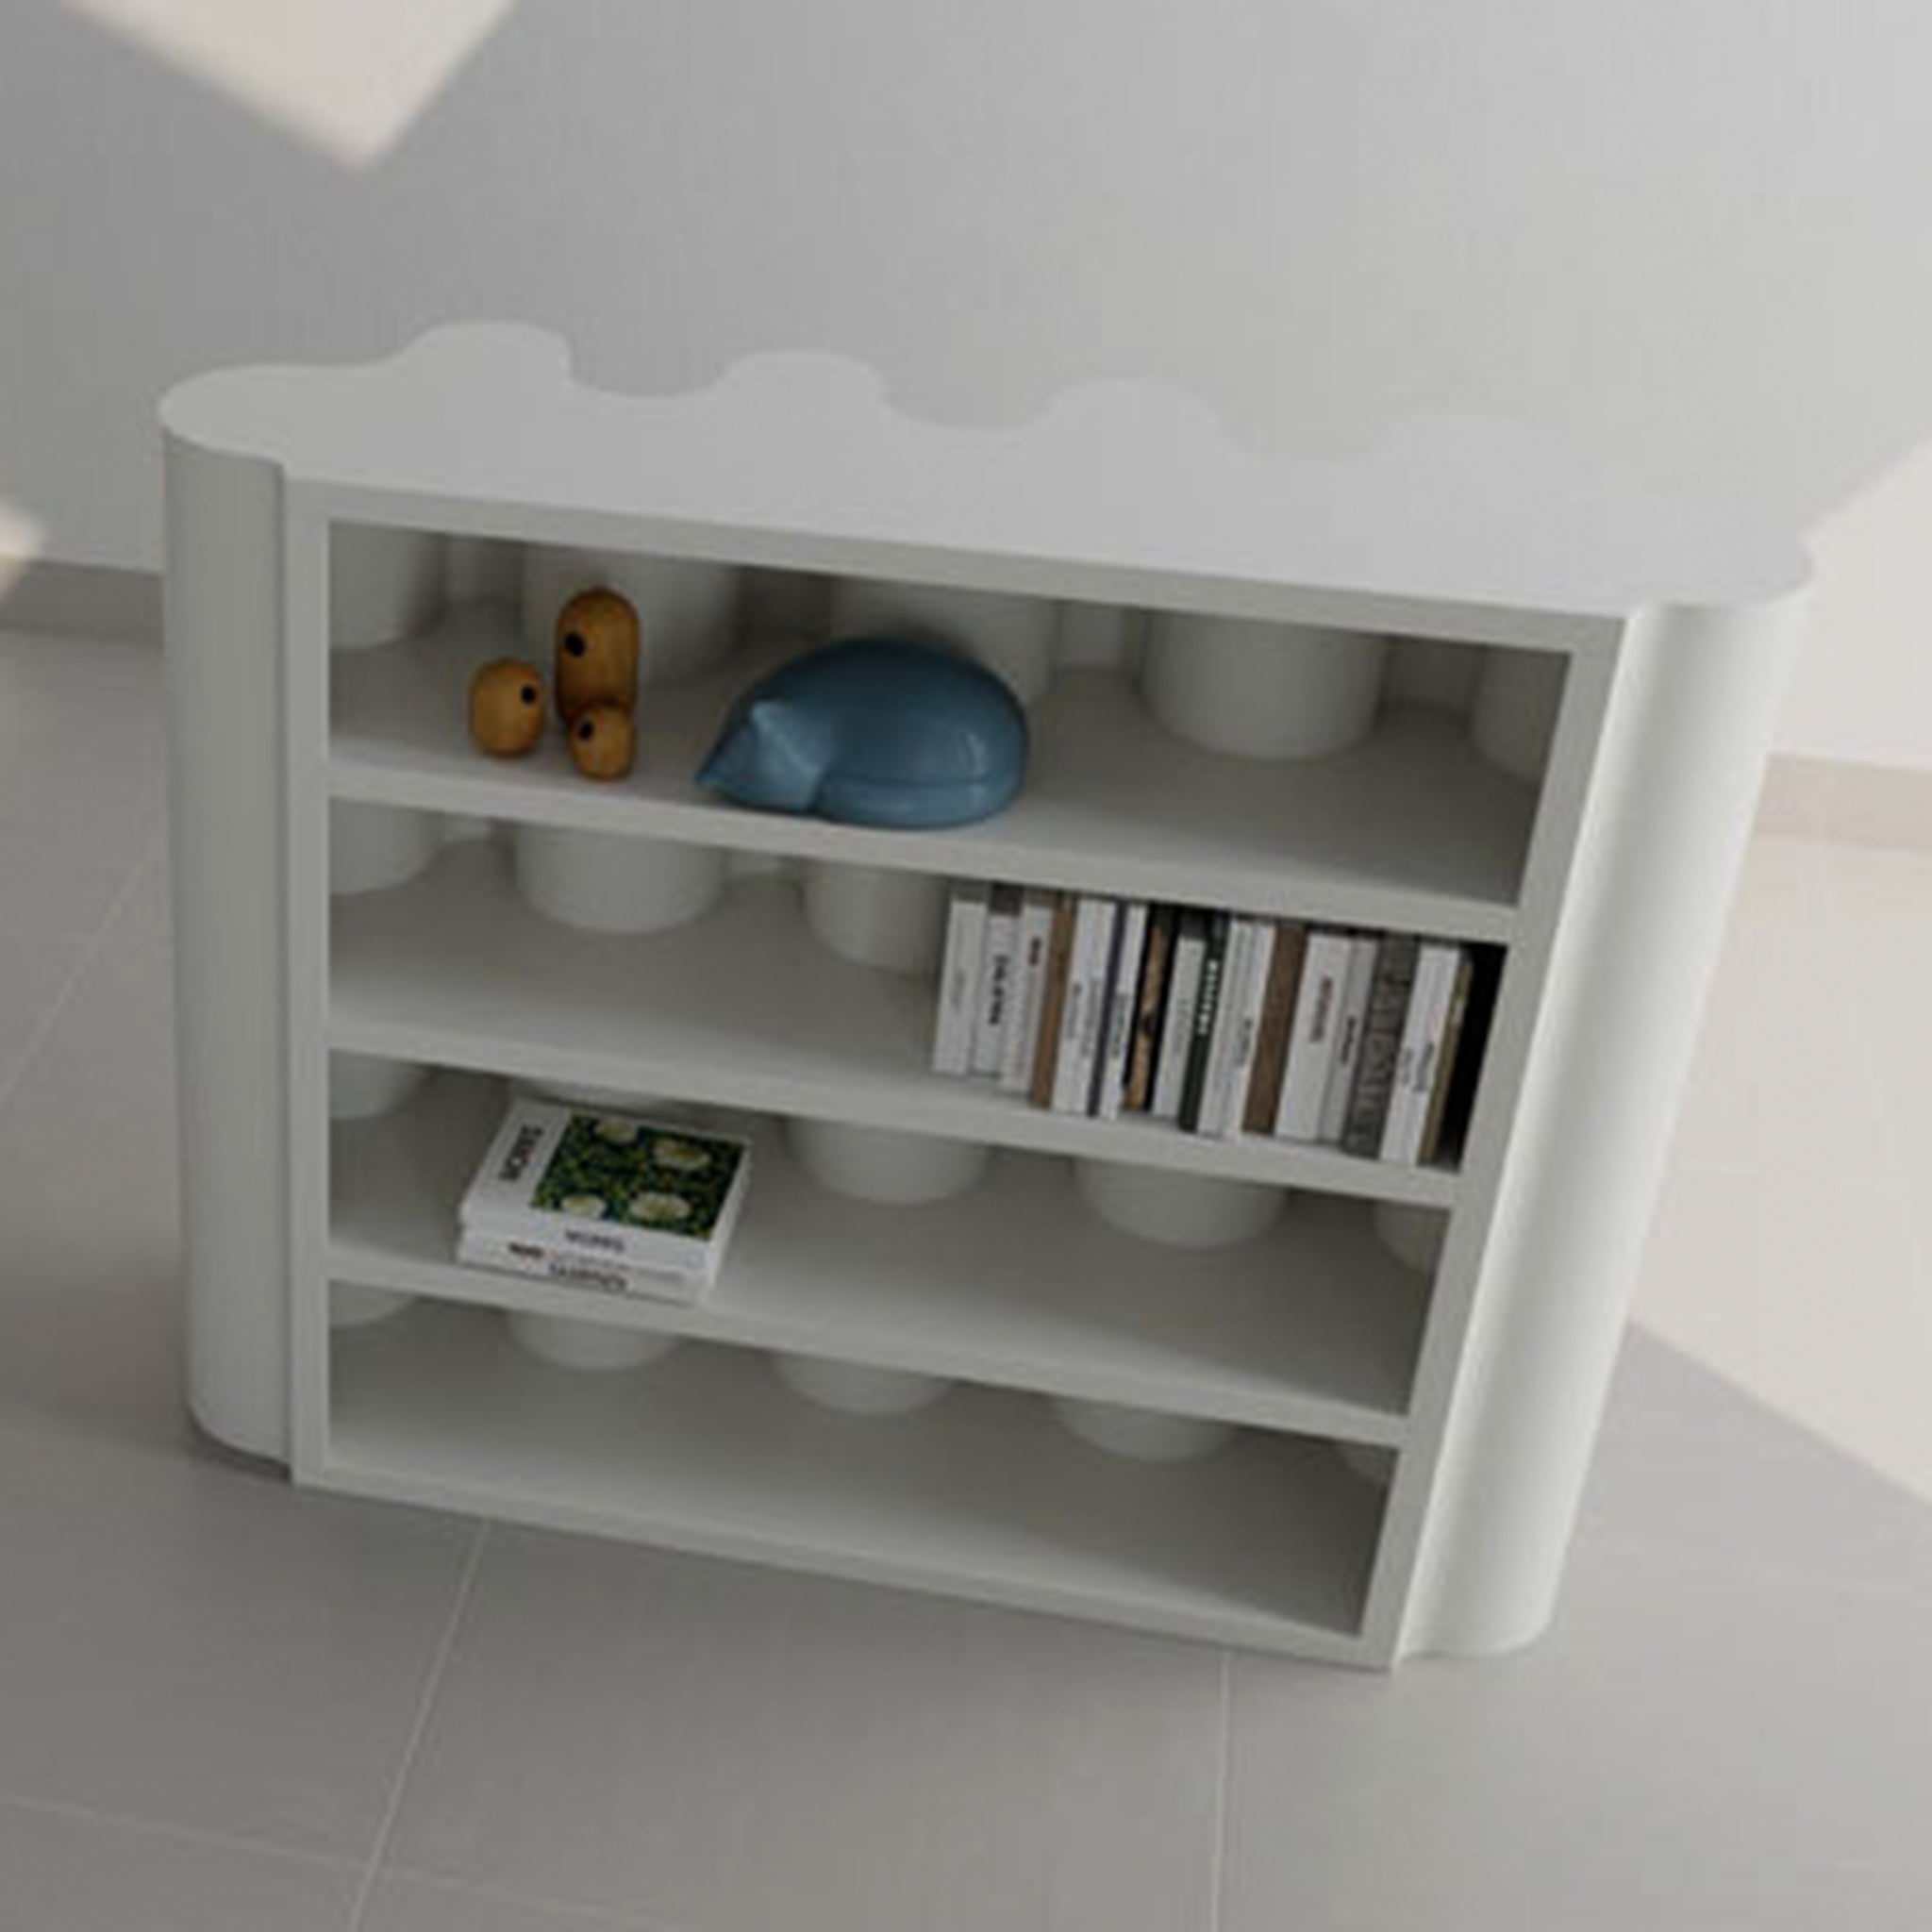 A modern white bookcase with a wavy top and rounded edges, featuring a collection of books and decorative items, including a blue ceramic cat and wooden sculptures.